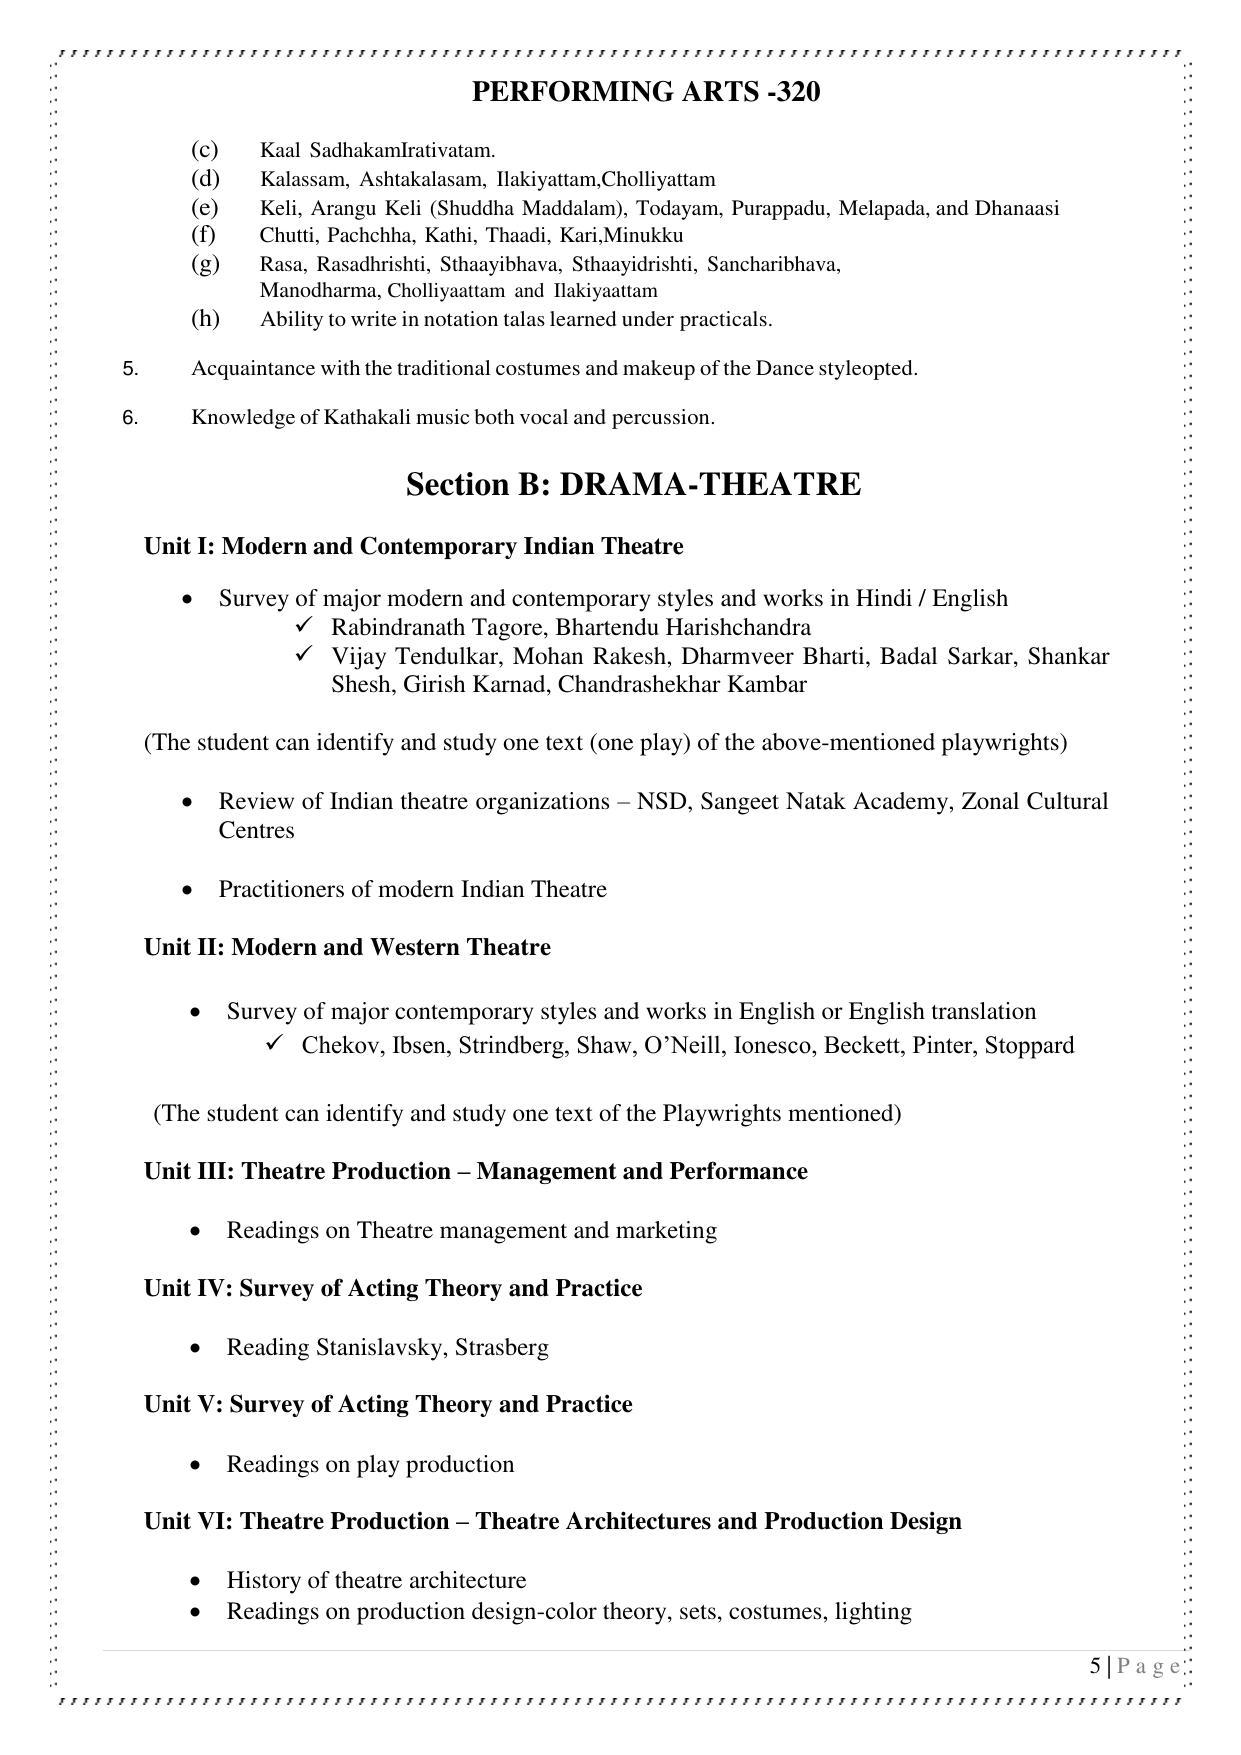 CUET Syllabus for Performing Arts (English) - Page 5